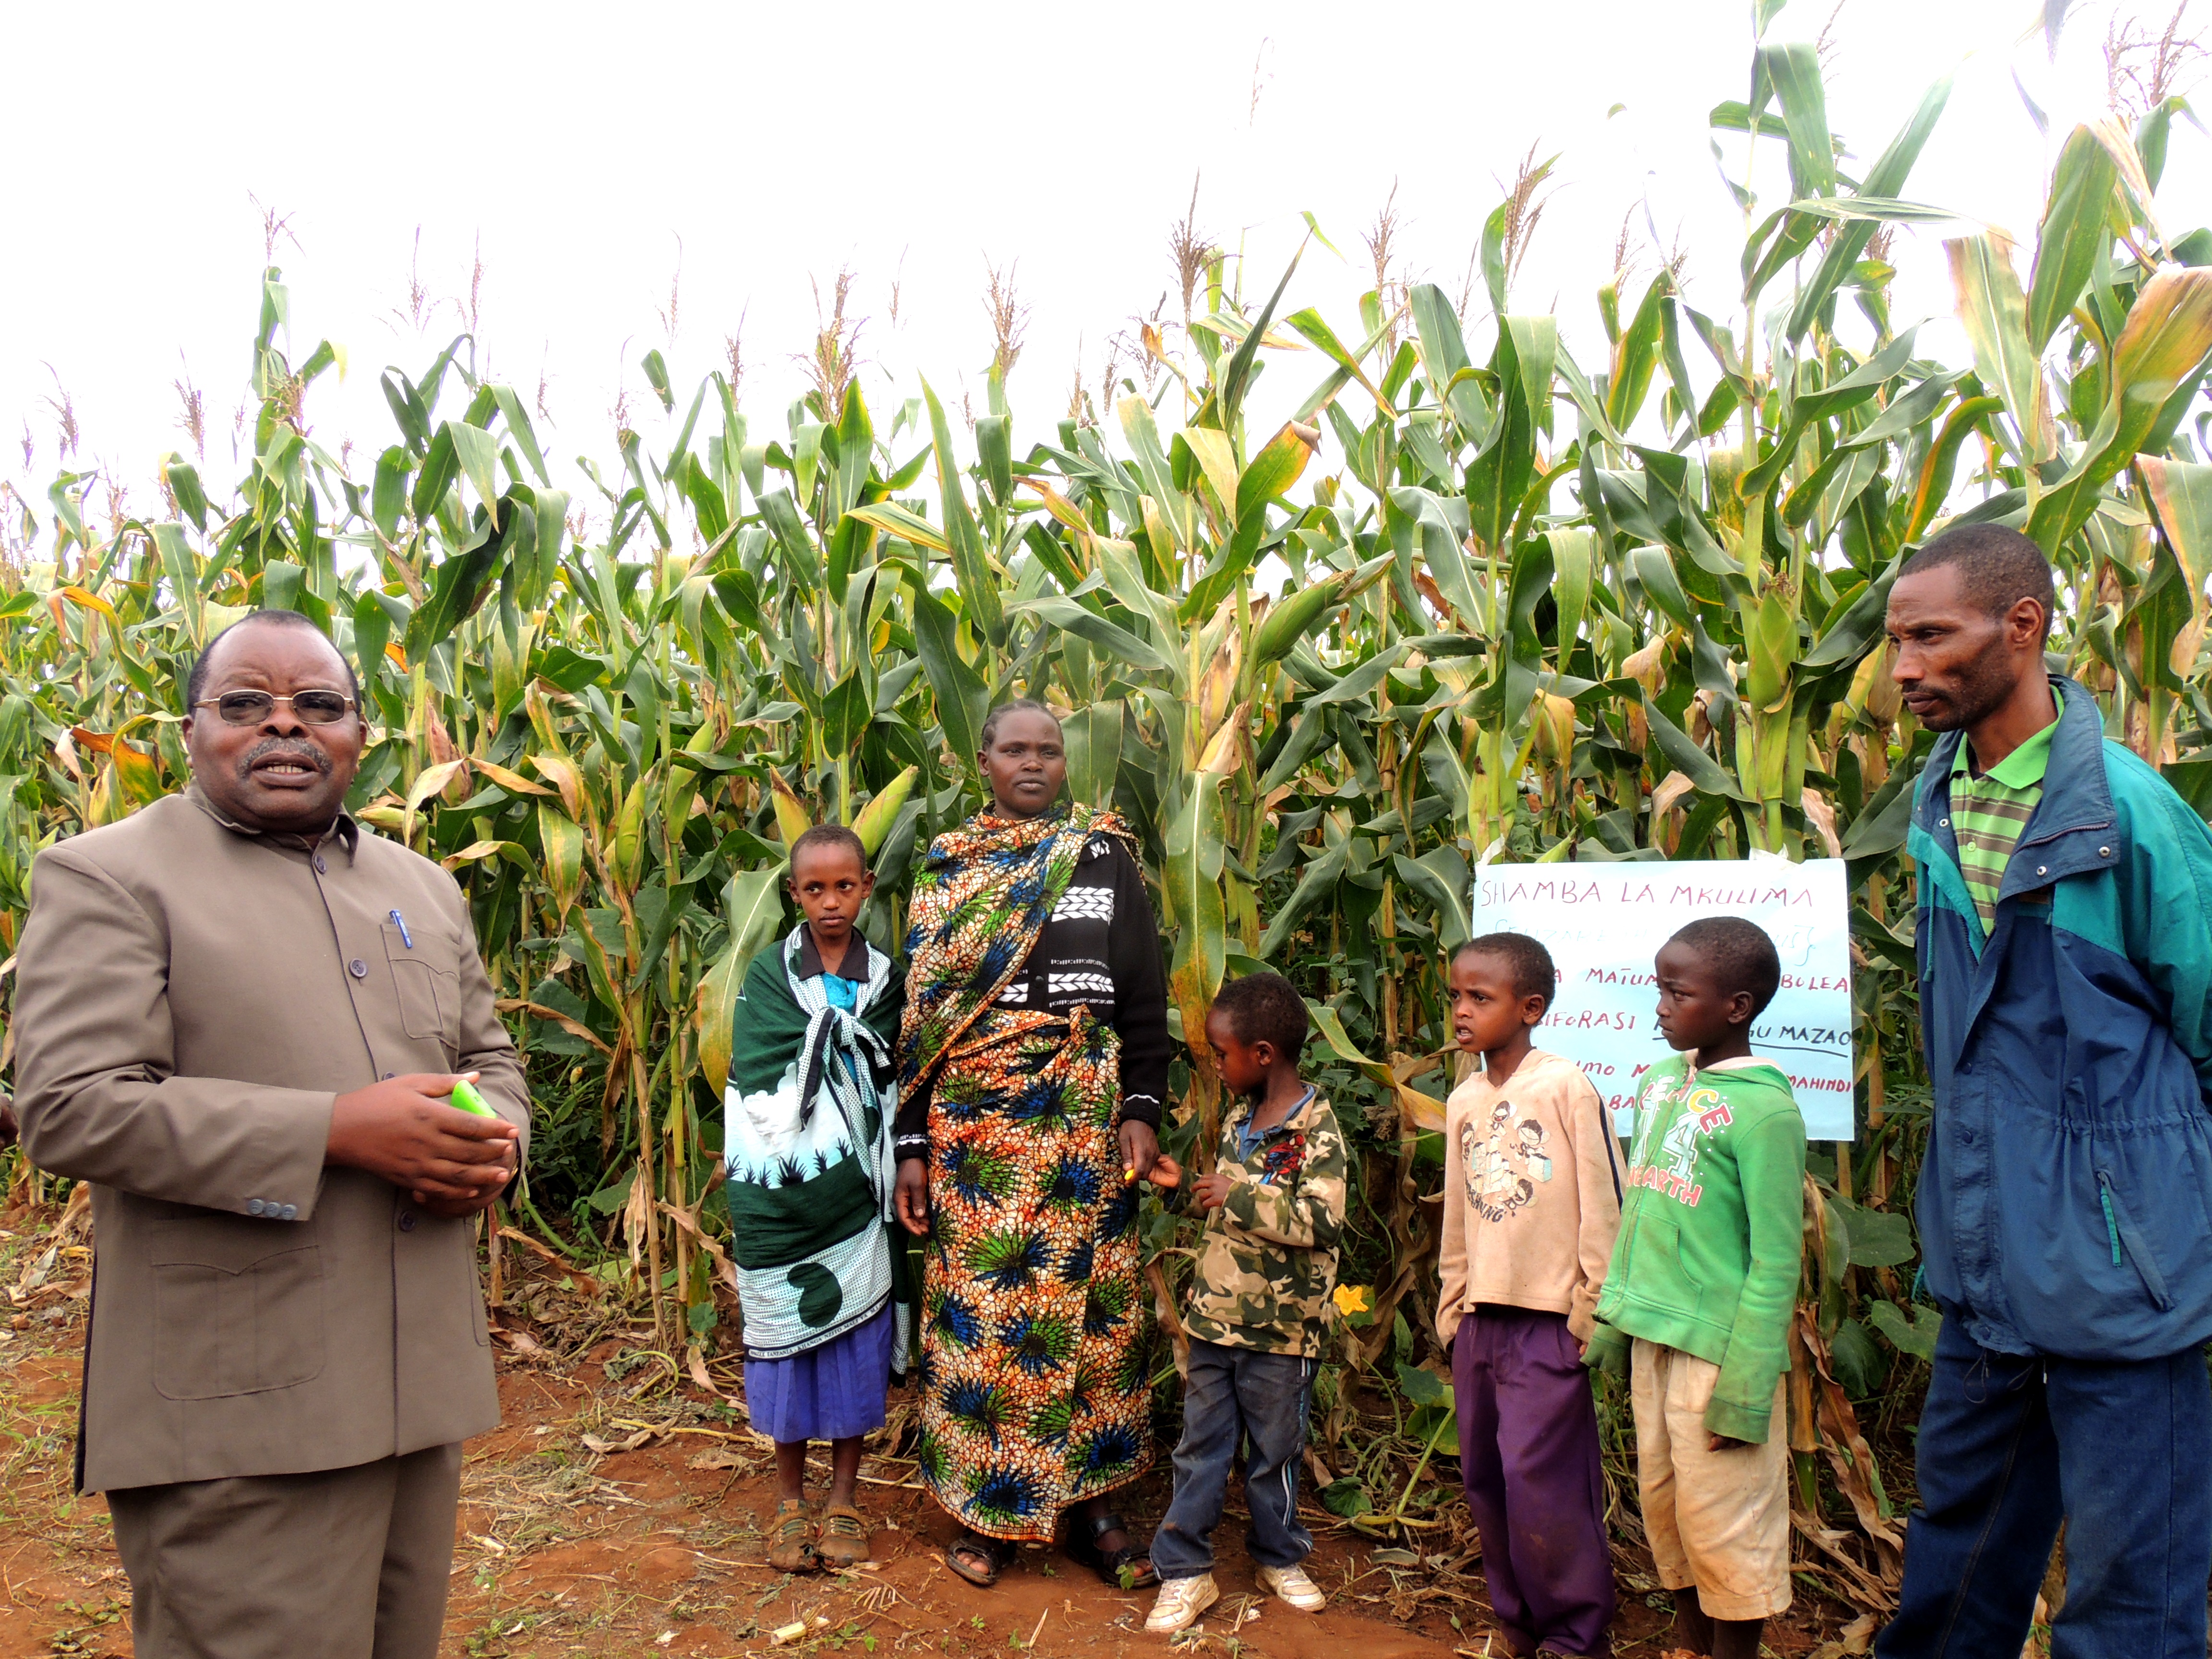 Cade Mshamu, the Babati district's administrative secretary speaks to a farmer, taking part in the project's demonstrations, and his family 